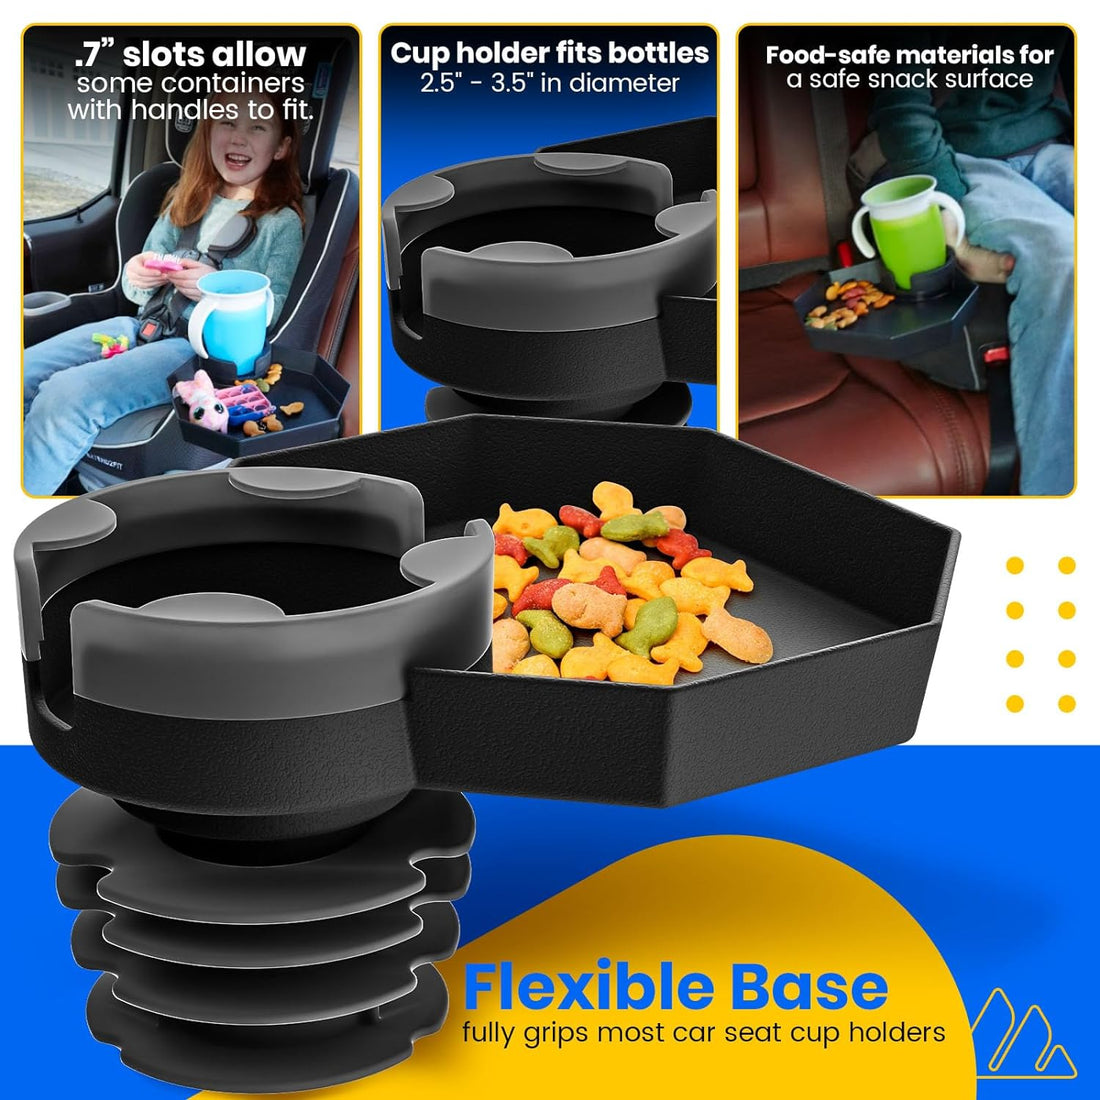 Kids Travel Tray – Large Base - Car Seat and Car Cup Holder Tray - Tray for Snacks, Entertainment, Toys – Includes Cup Holder – Fits Most Car Seats